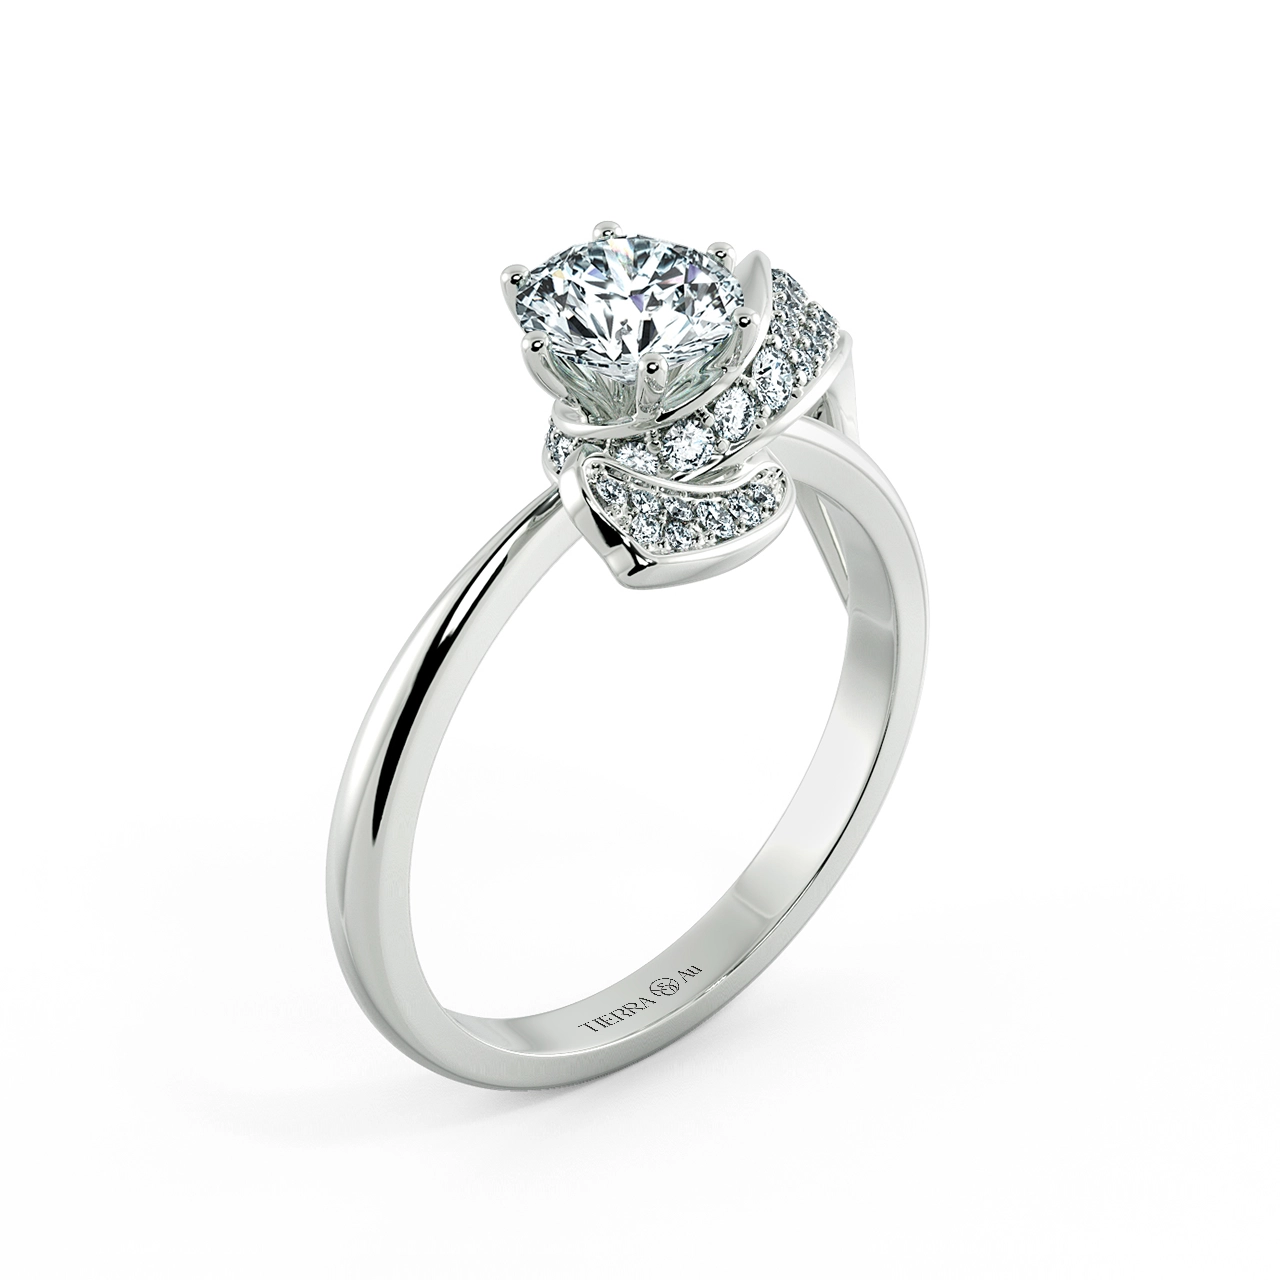 Solitaire Engagement Ring with Stylized Neck NCH1305 4